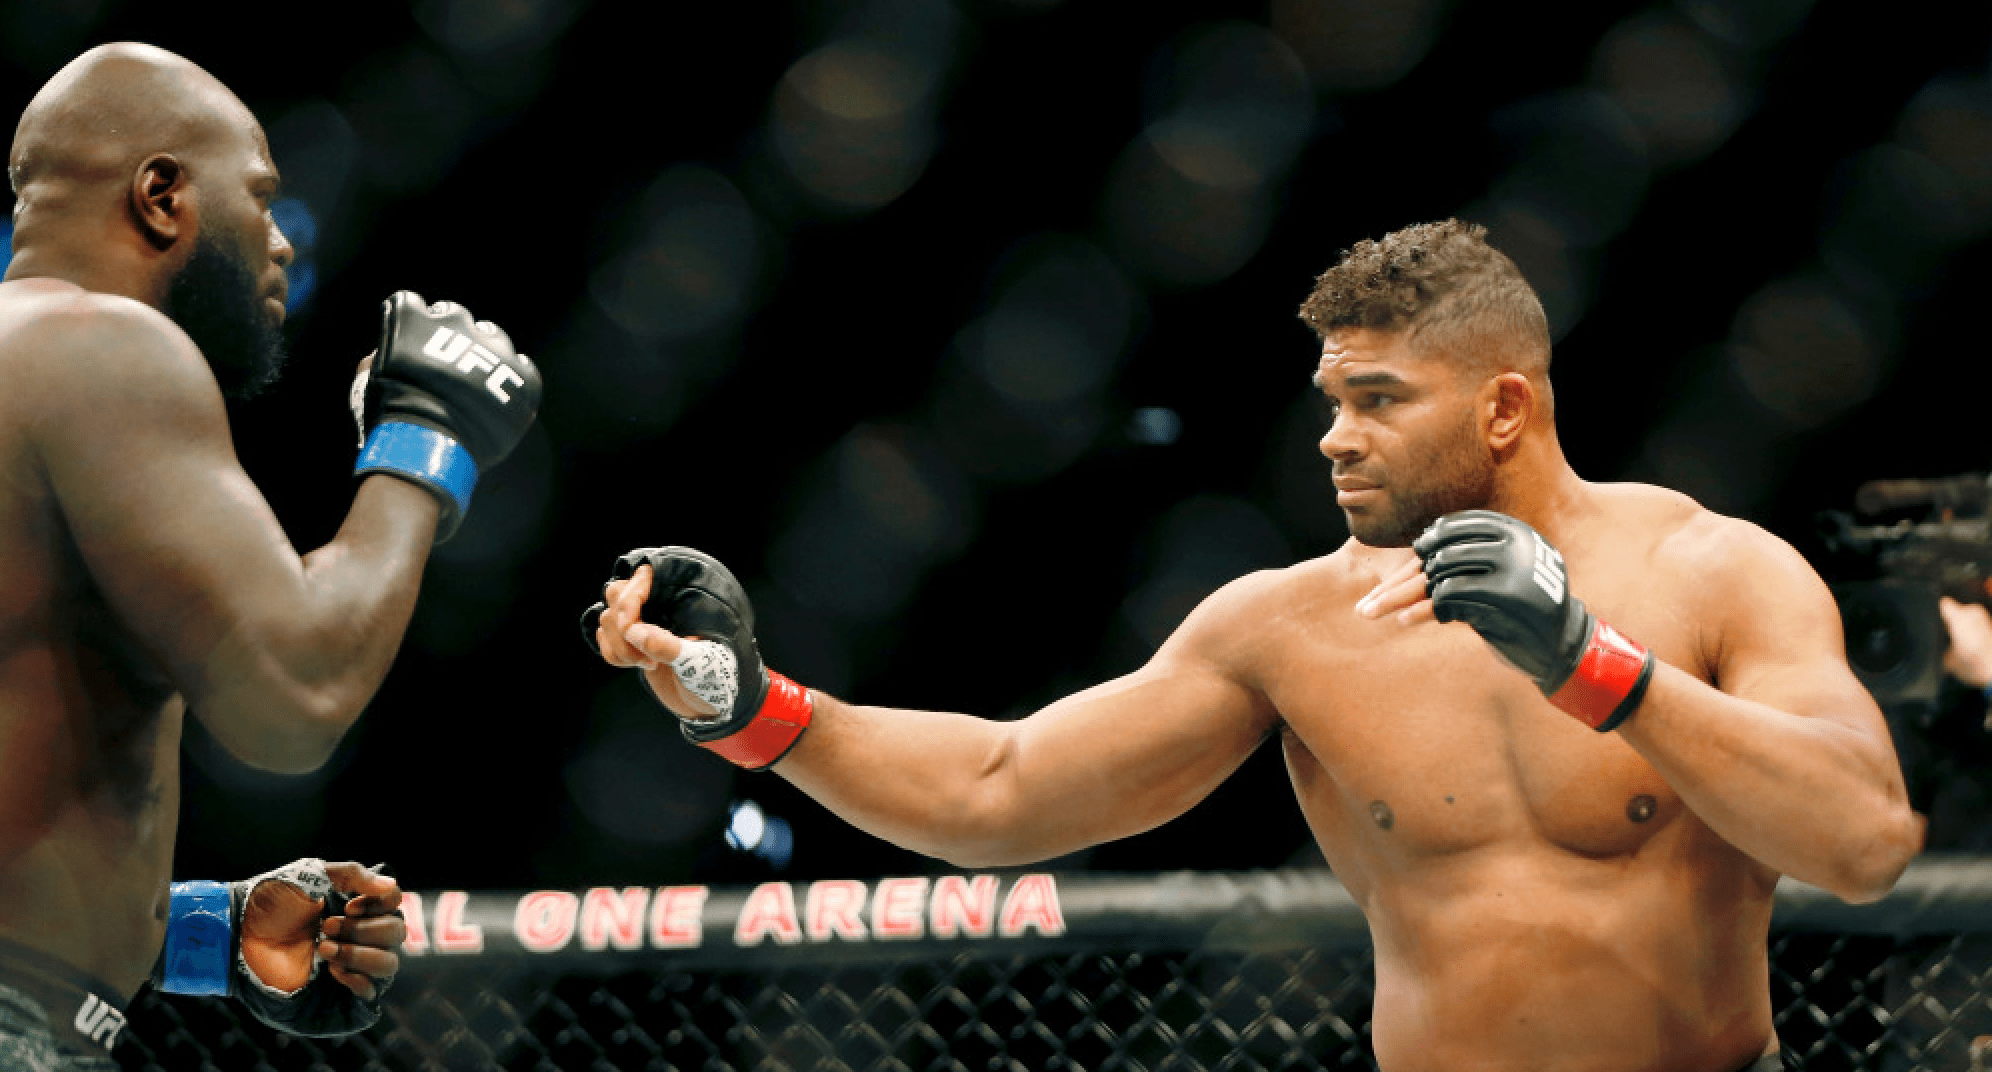 UFC: Alistair Overeem Wants To Avenge Knockout Loss Next